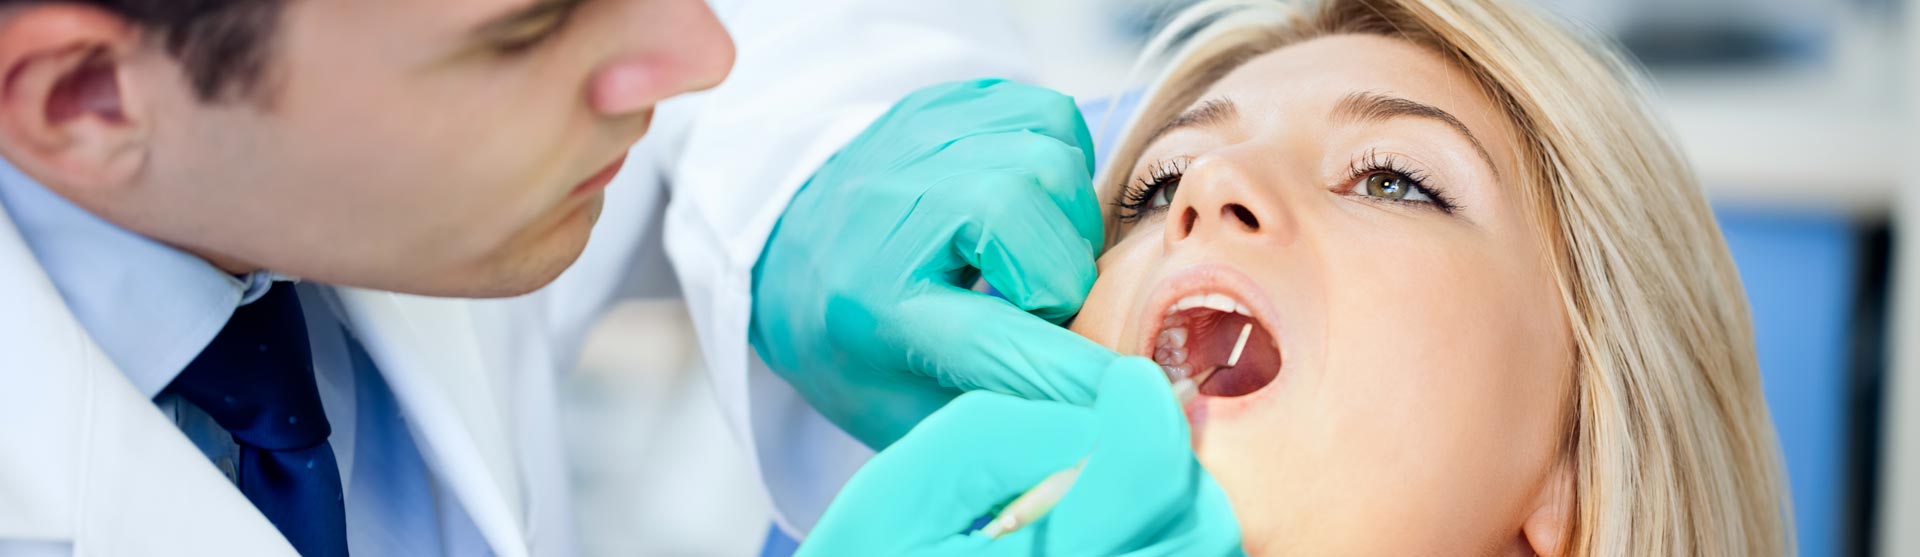 Dentist examining patient for oral cancer